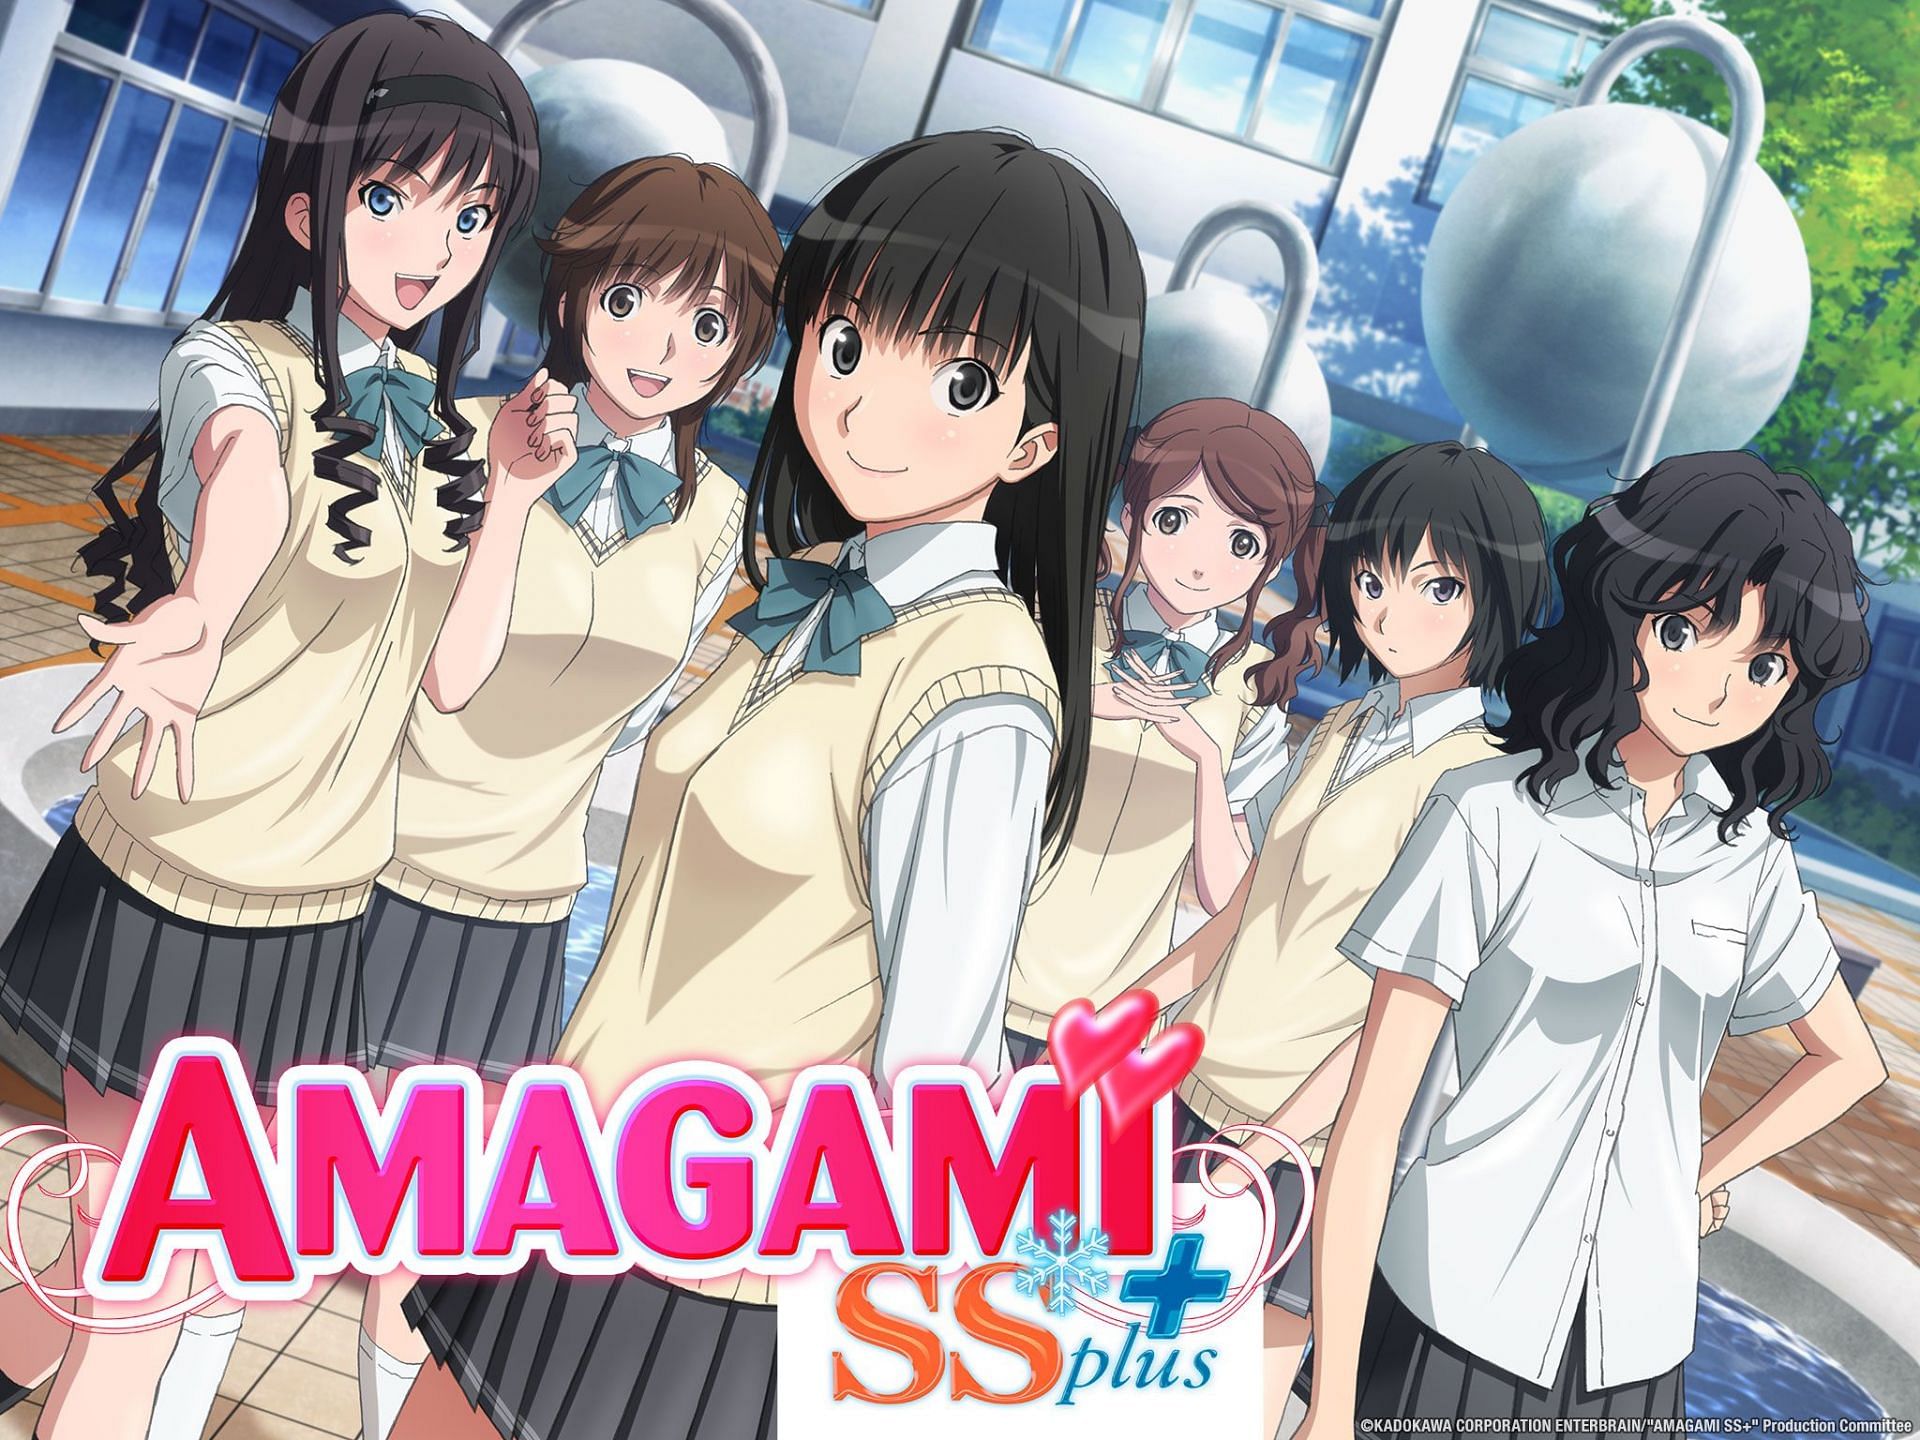 Key visual of the Amagami SS anime series featuring the protagonist and other female deuteragonists (Image via AIC)